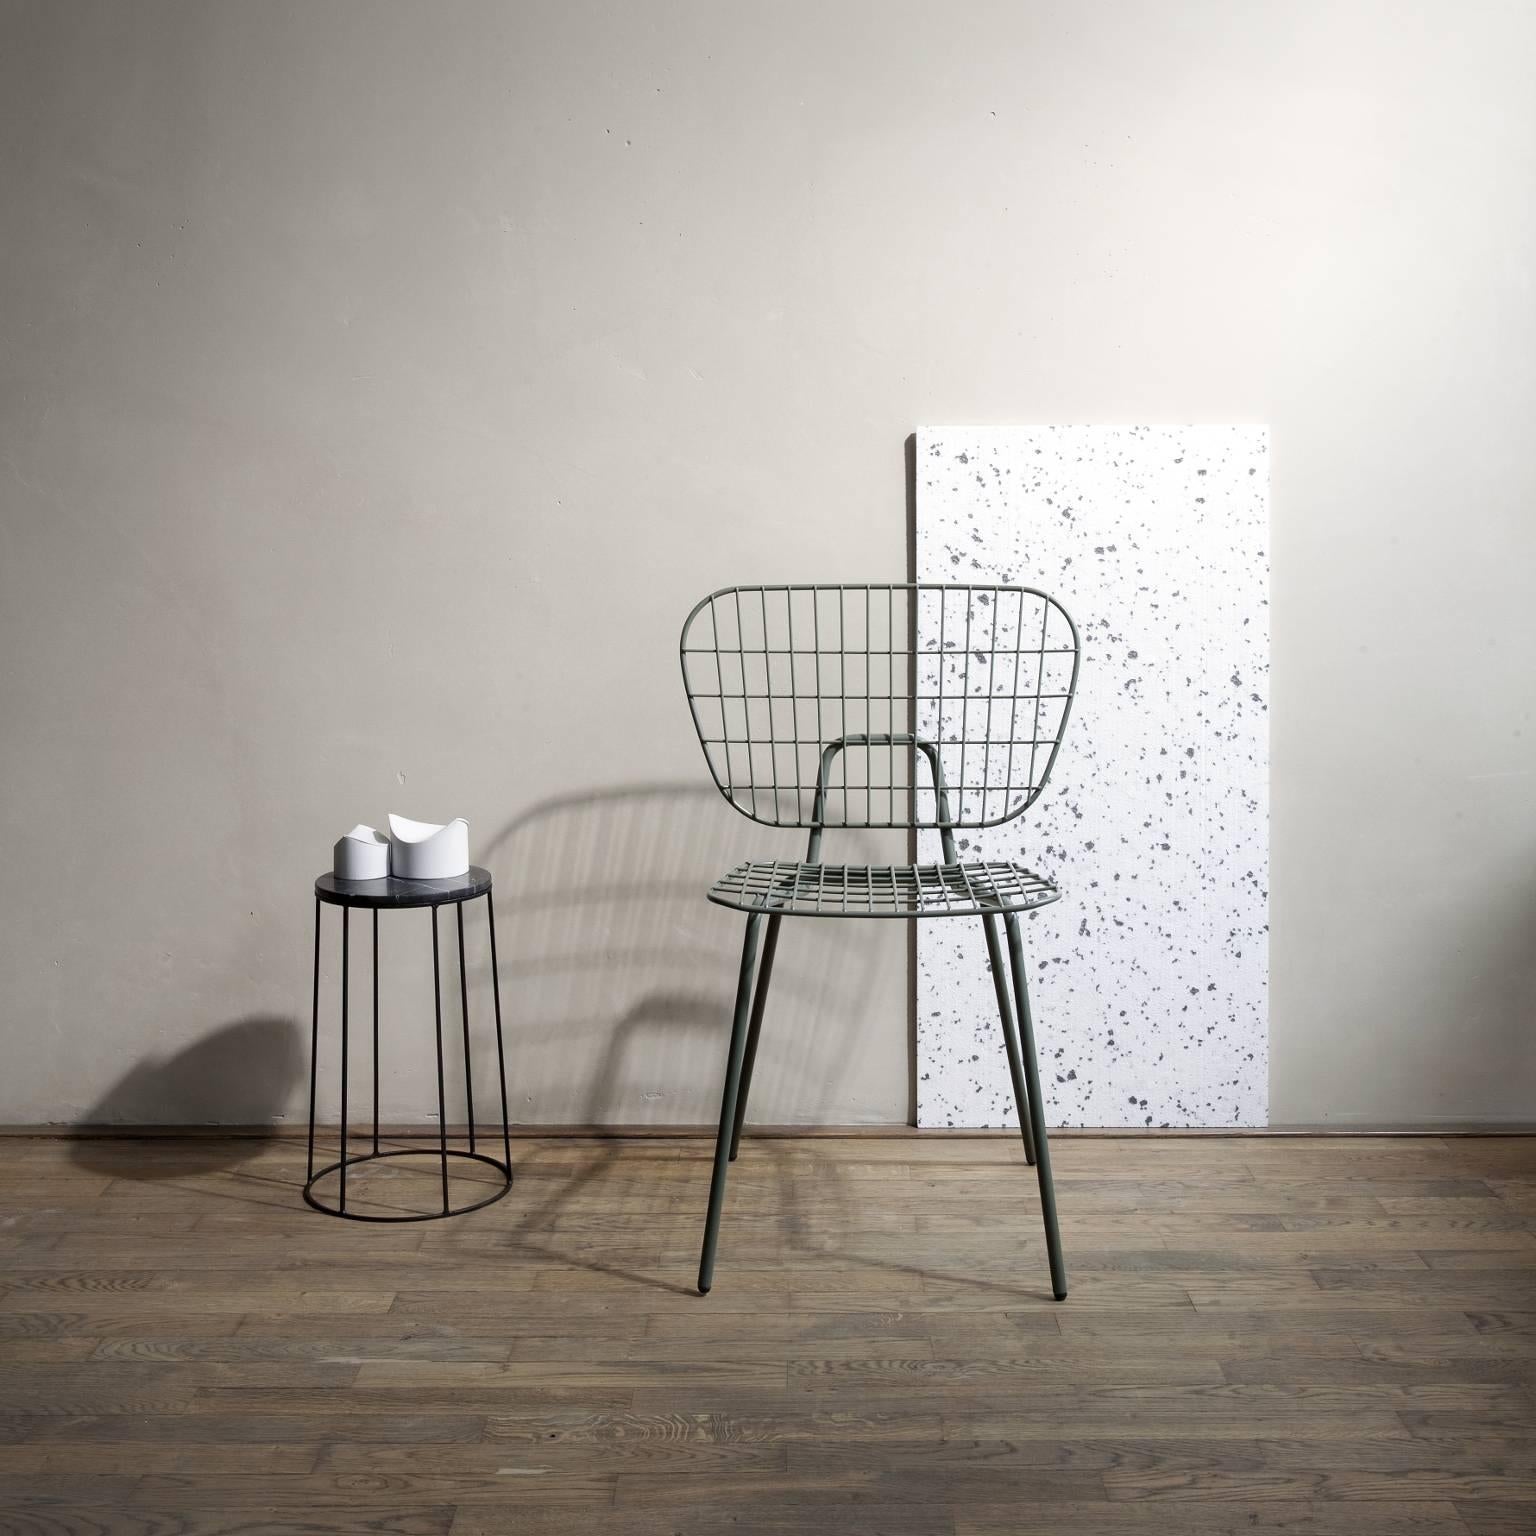 Powder-Coated Wm String Dining Chair by Studio Wm, in Two-Pack, Black Steel Frame